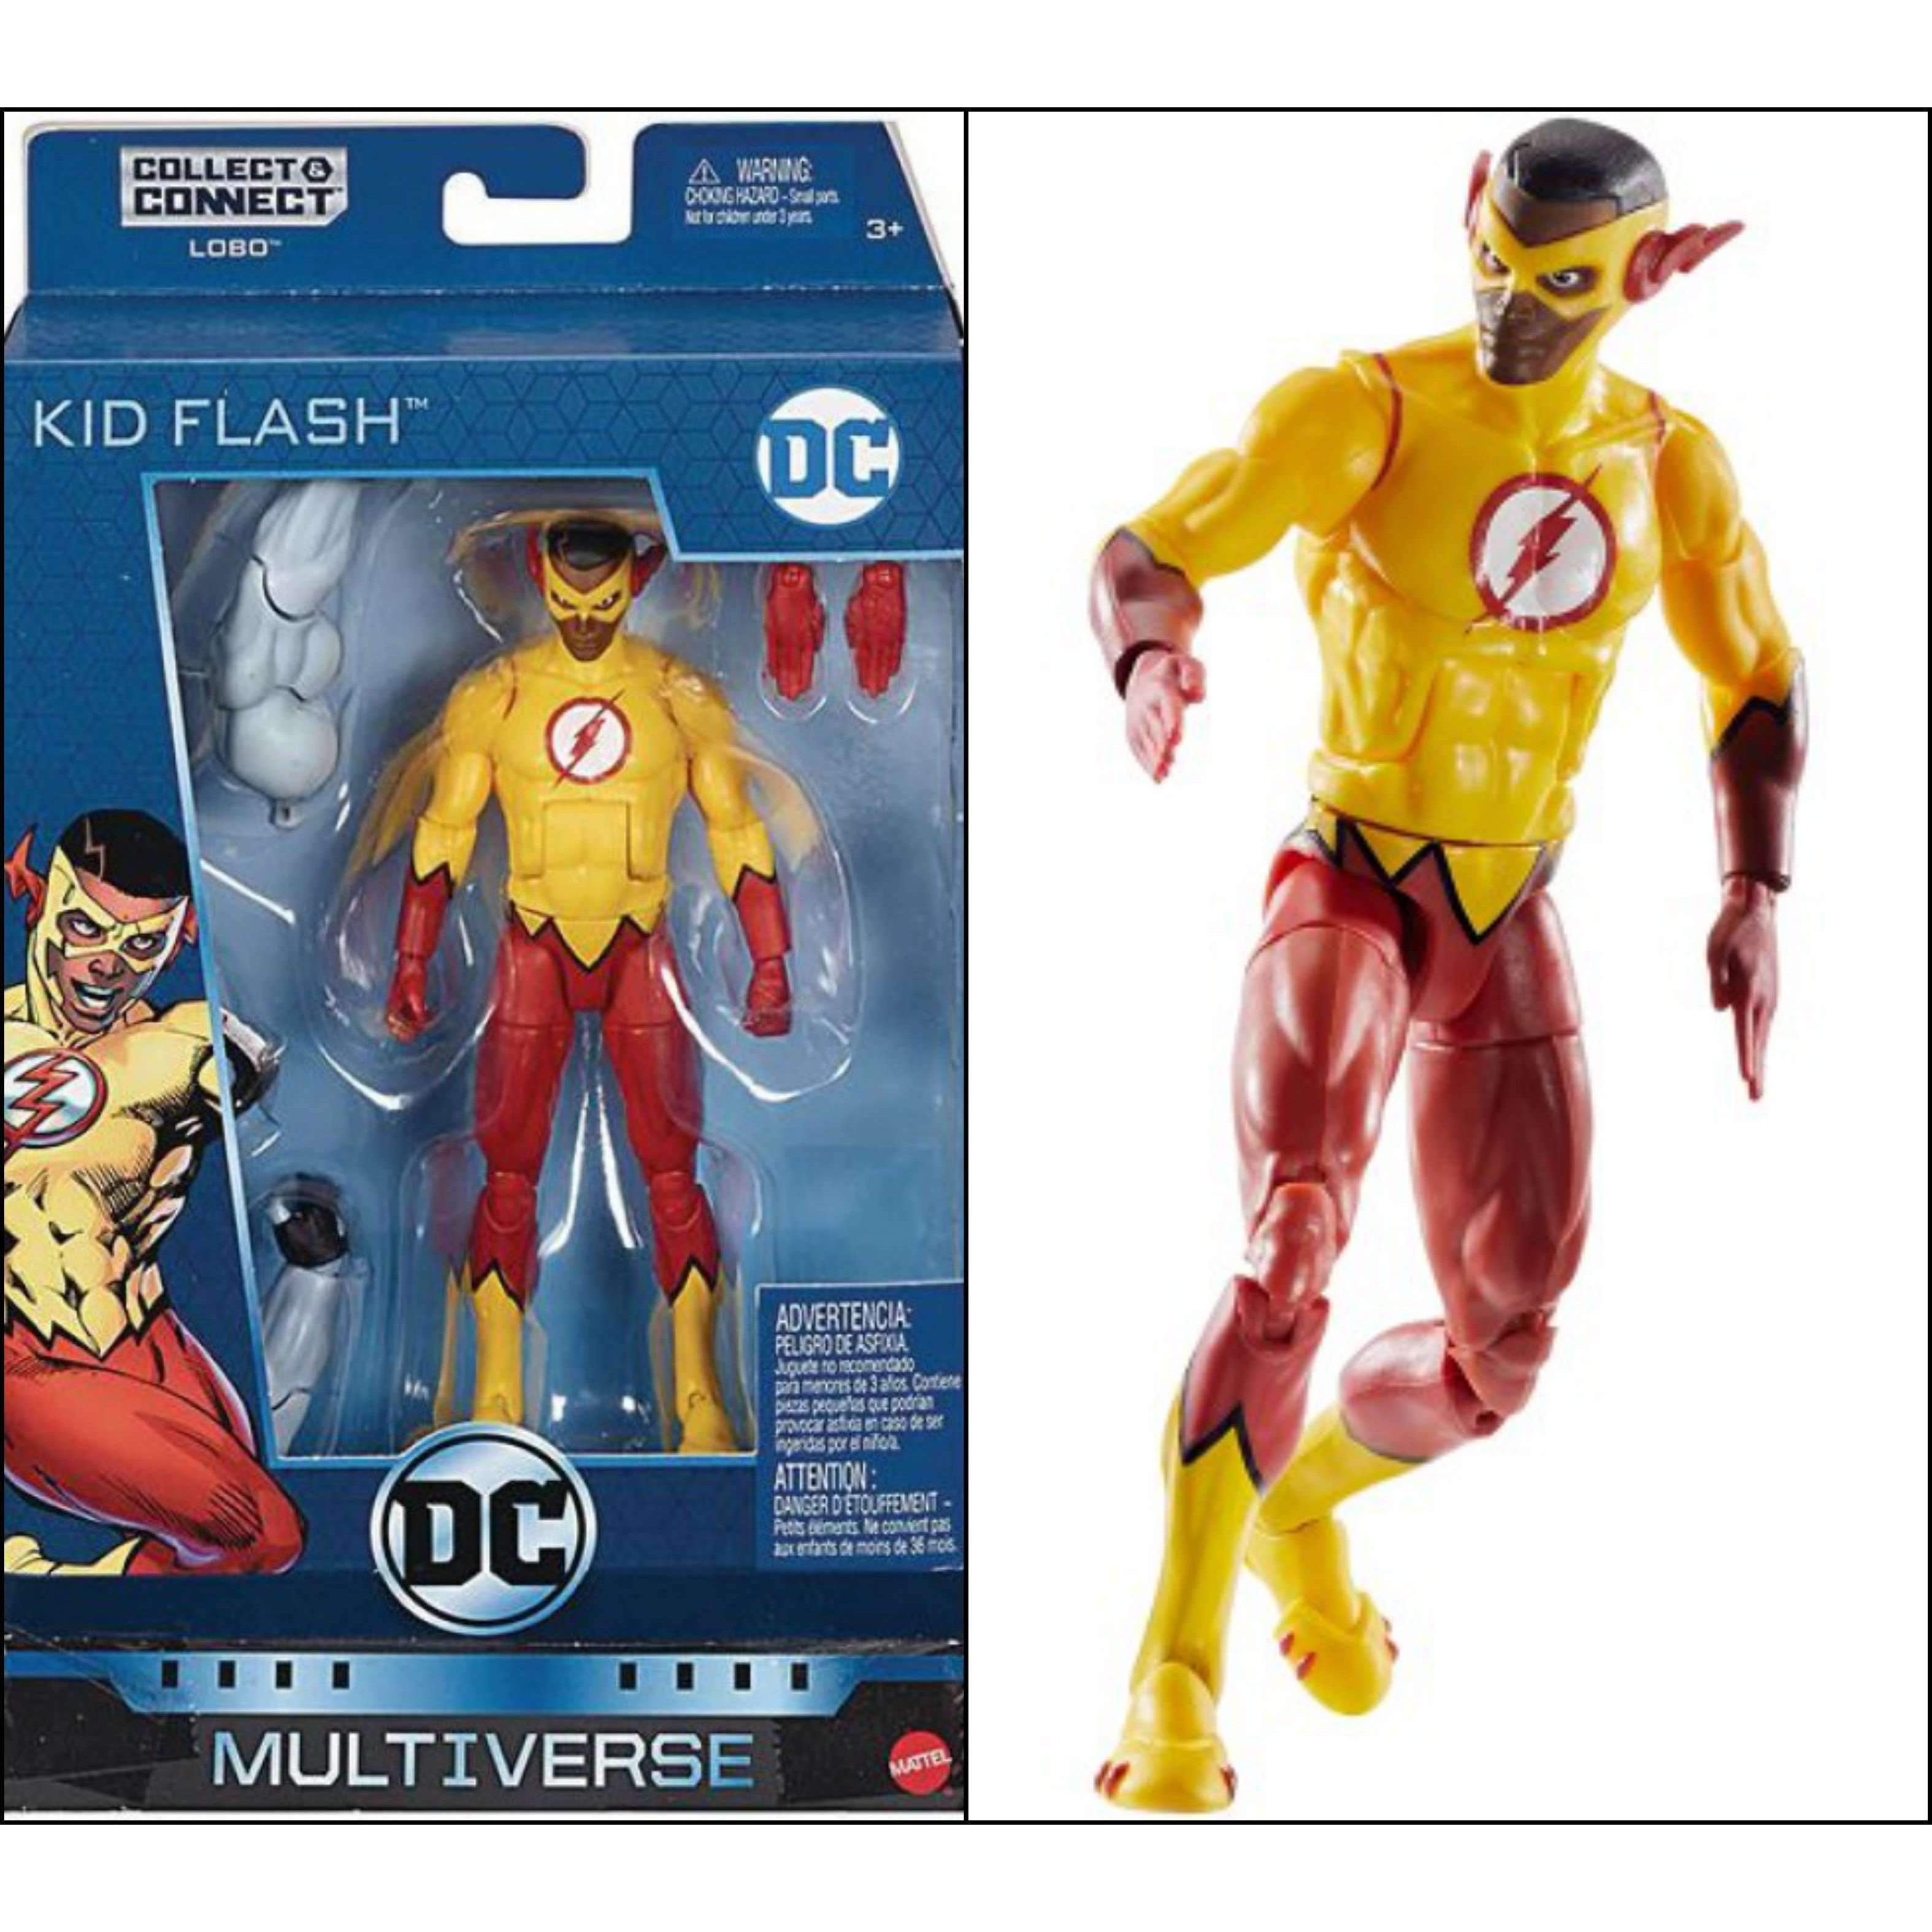 Image of DC Comics Multiverse Wave 10 (Collect & Connect Lobo) - Kid Flash